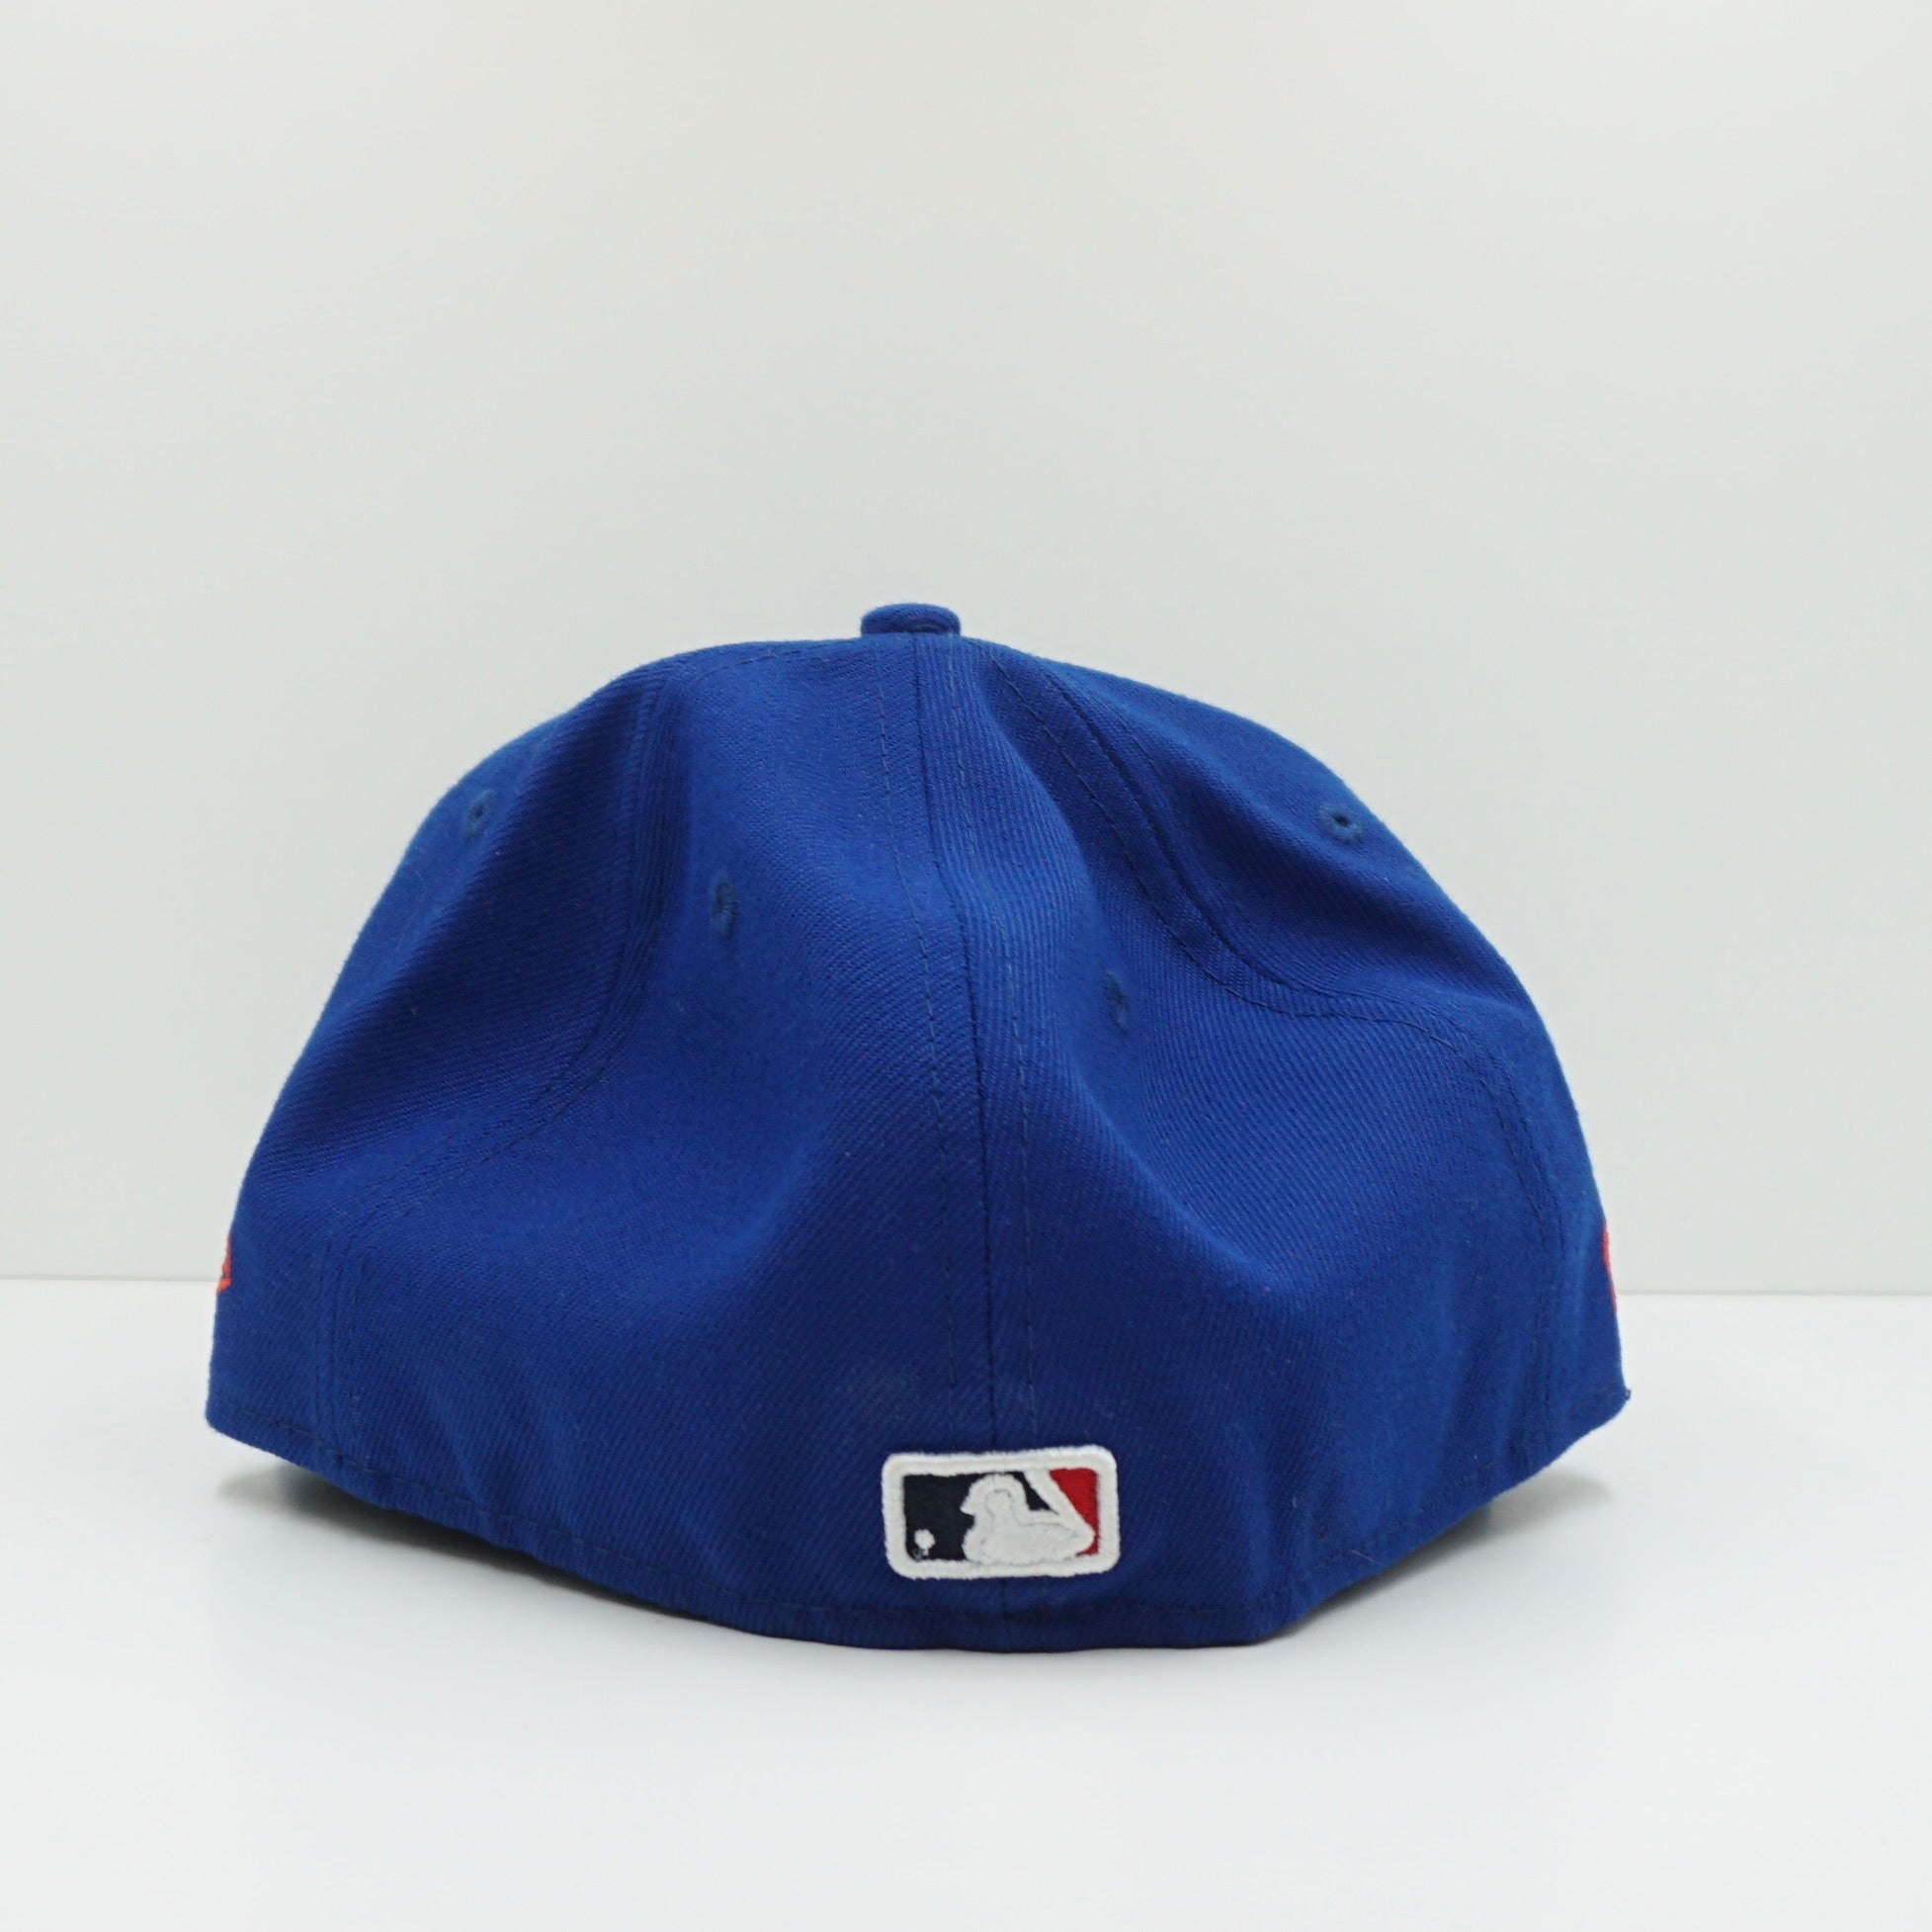 New Era SNS New York Mets Fitted Cap